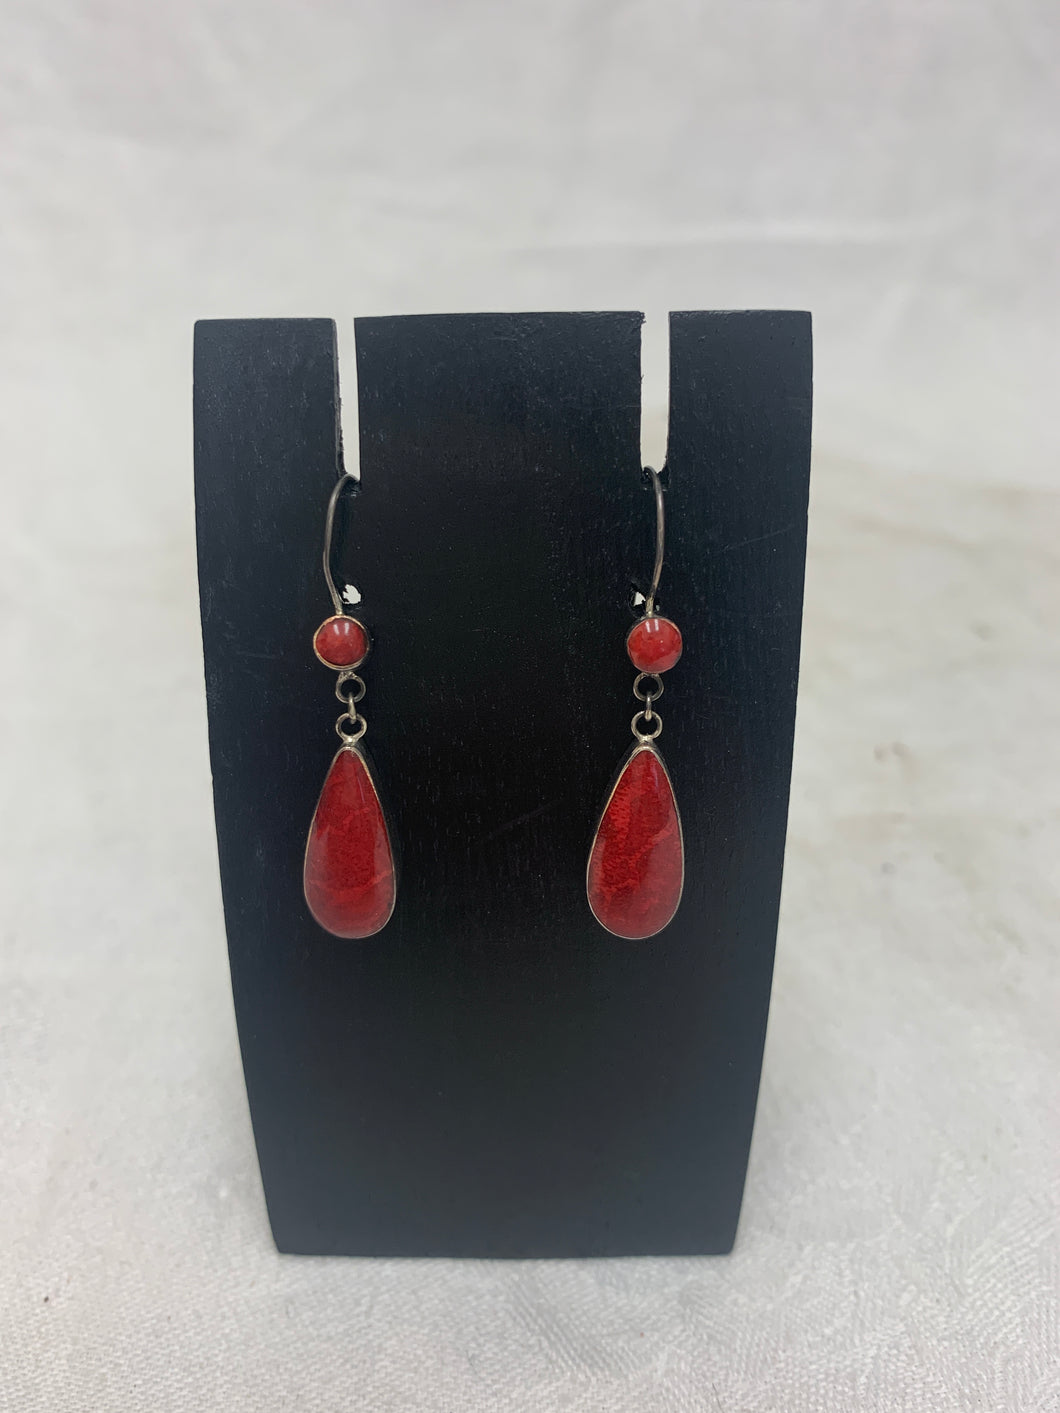 earring - long oval - red coral (harvested) - sterling silver